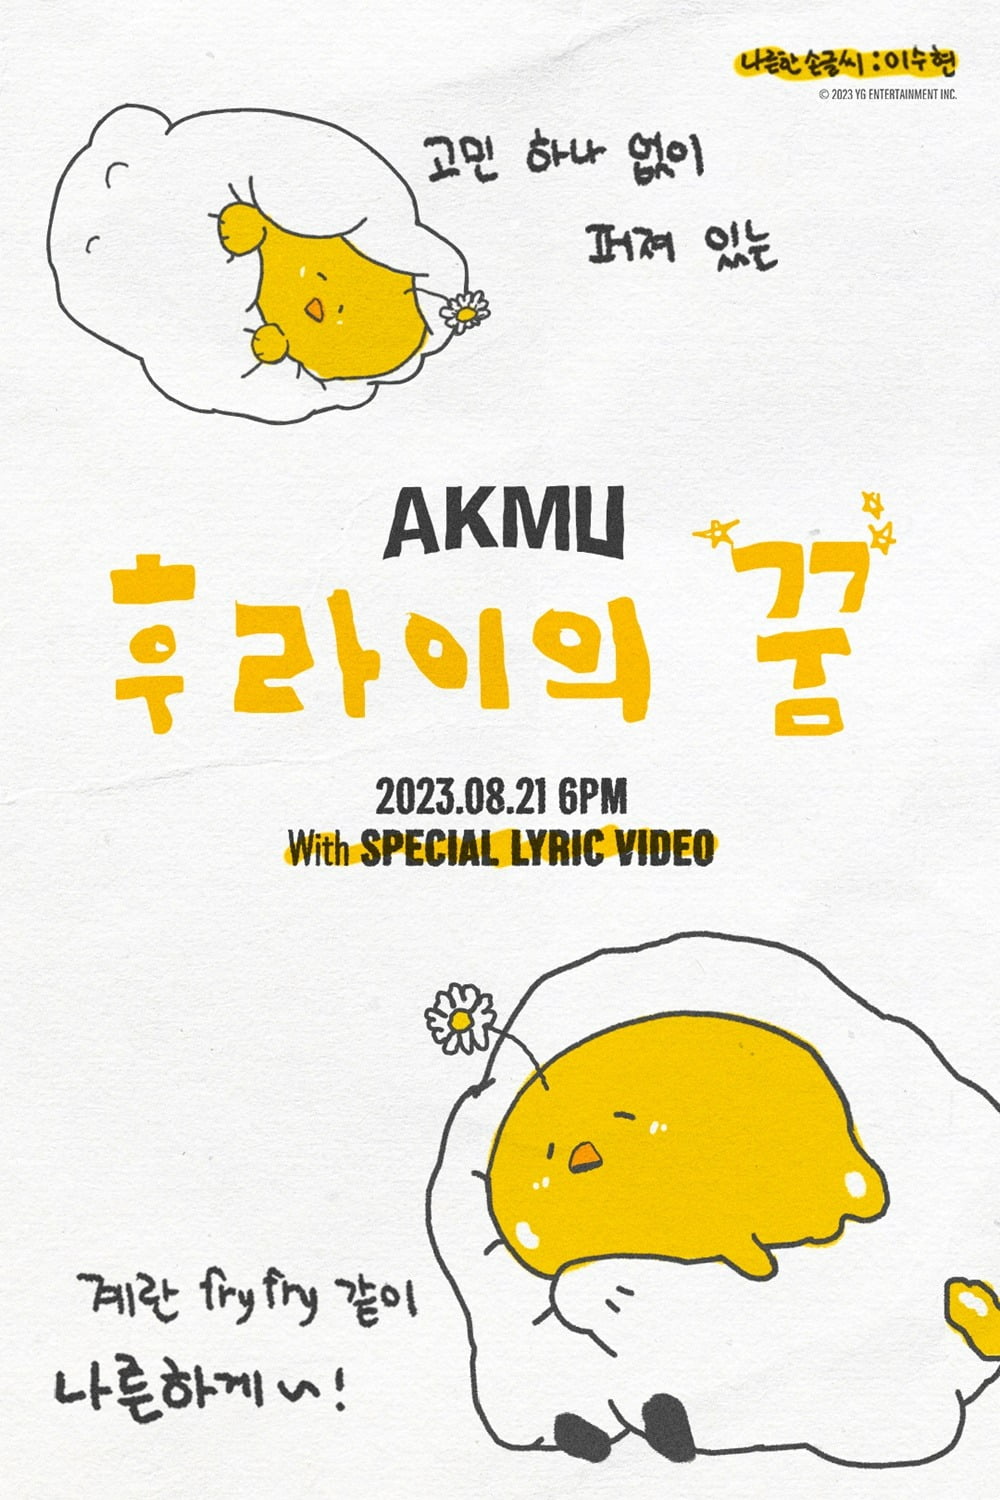 AKMU released some of the lyrics of the new song